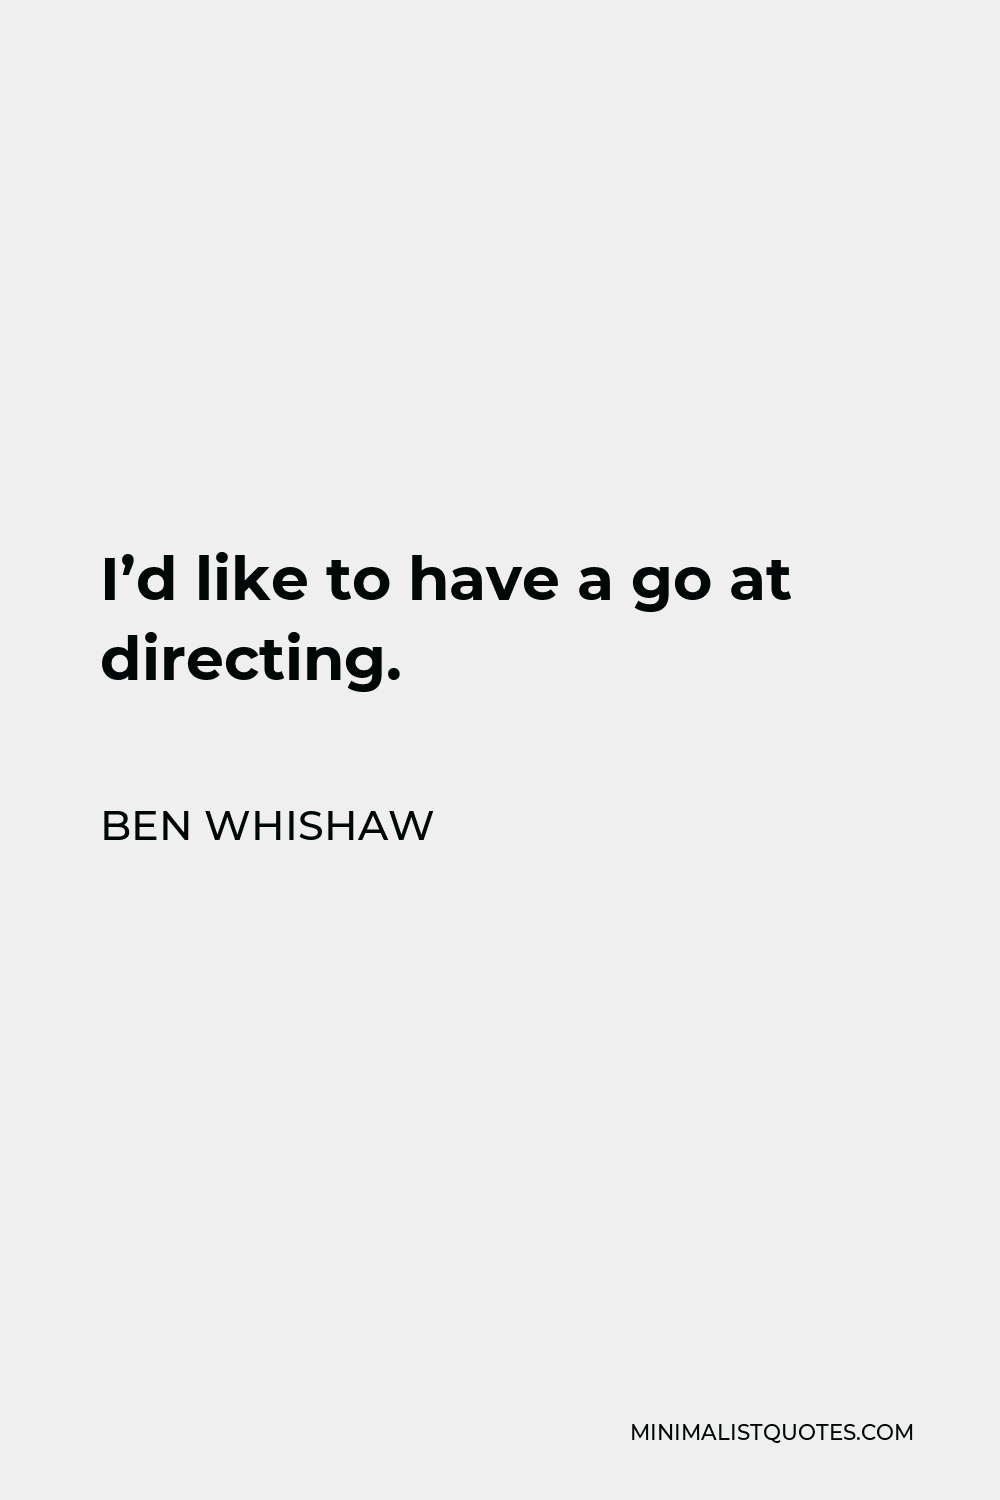 Ben Whishaw Quote - I’d like to have a go at directing.